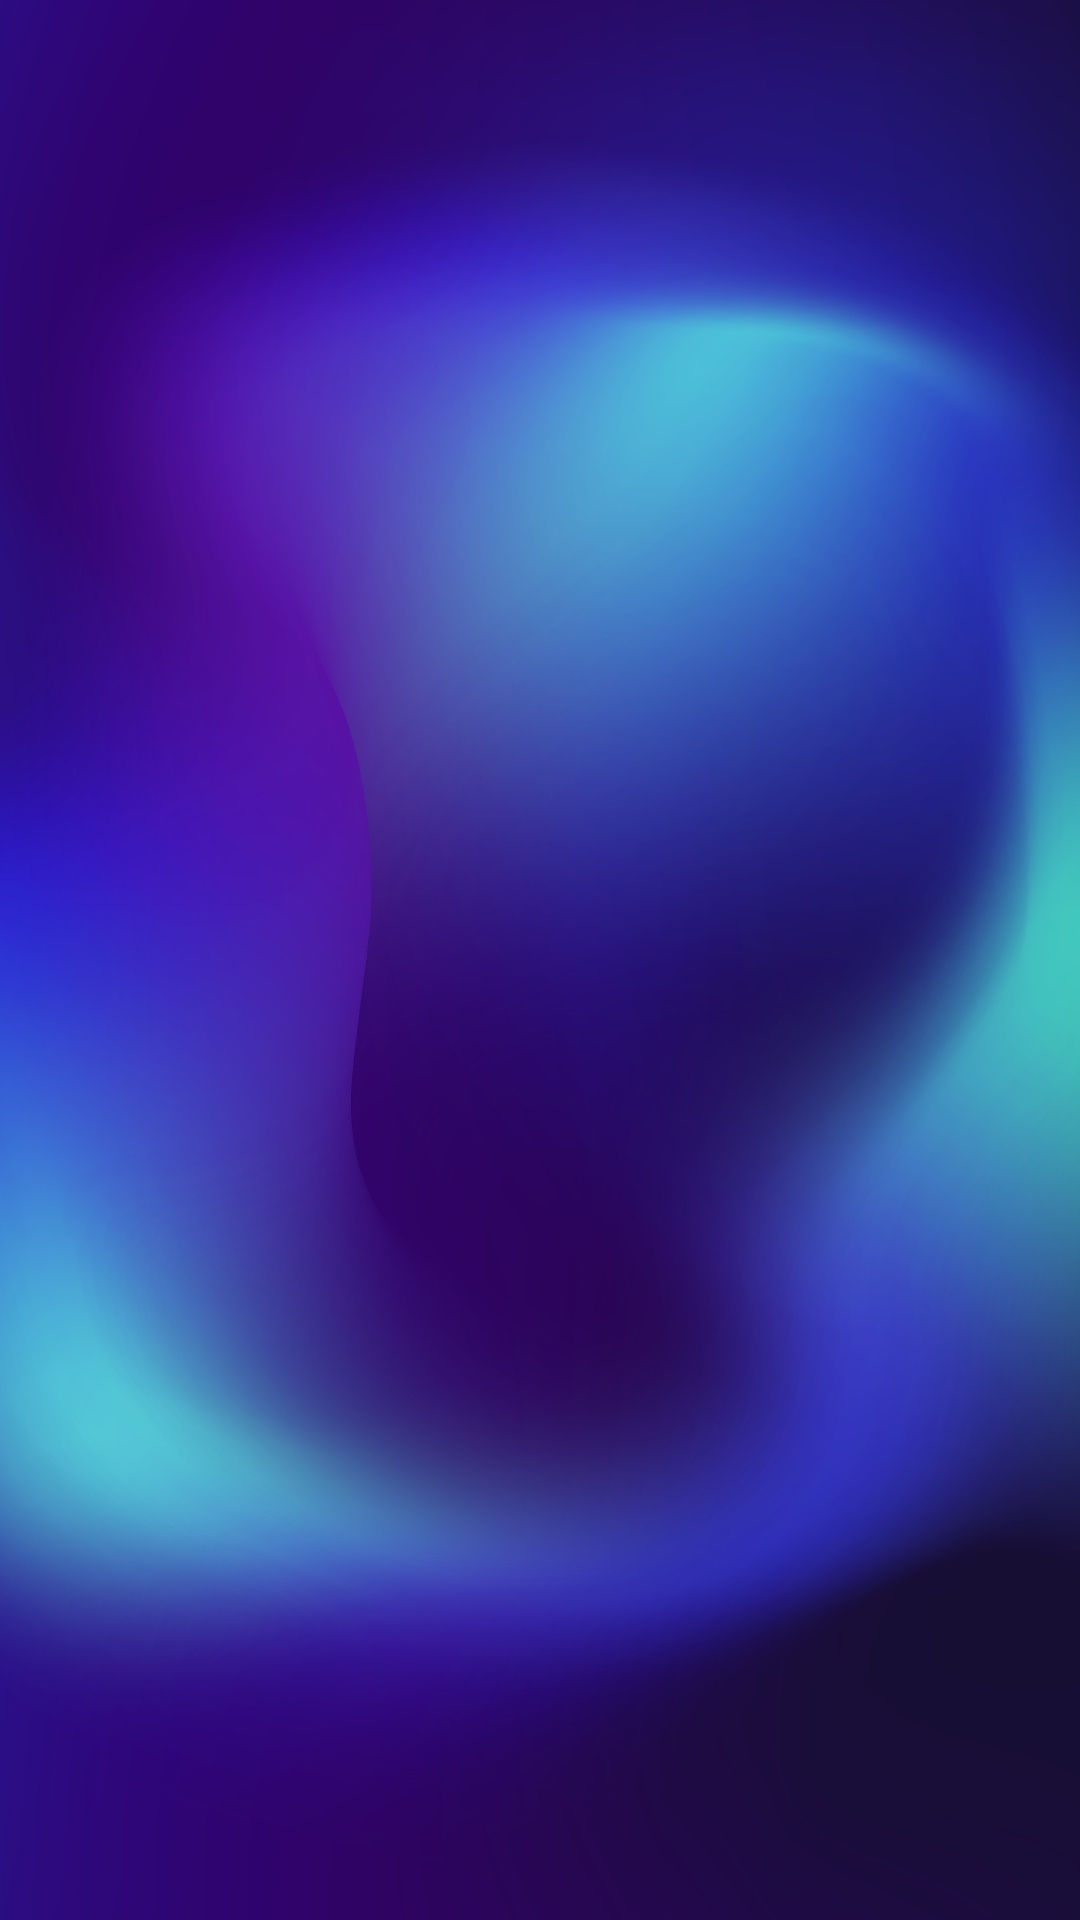 Atmosphere, Purple, Violet, Gas, Electric Blue. Wallpaper in 1080x1920 Resolution